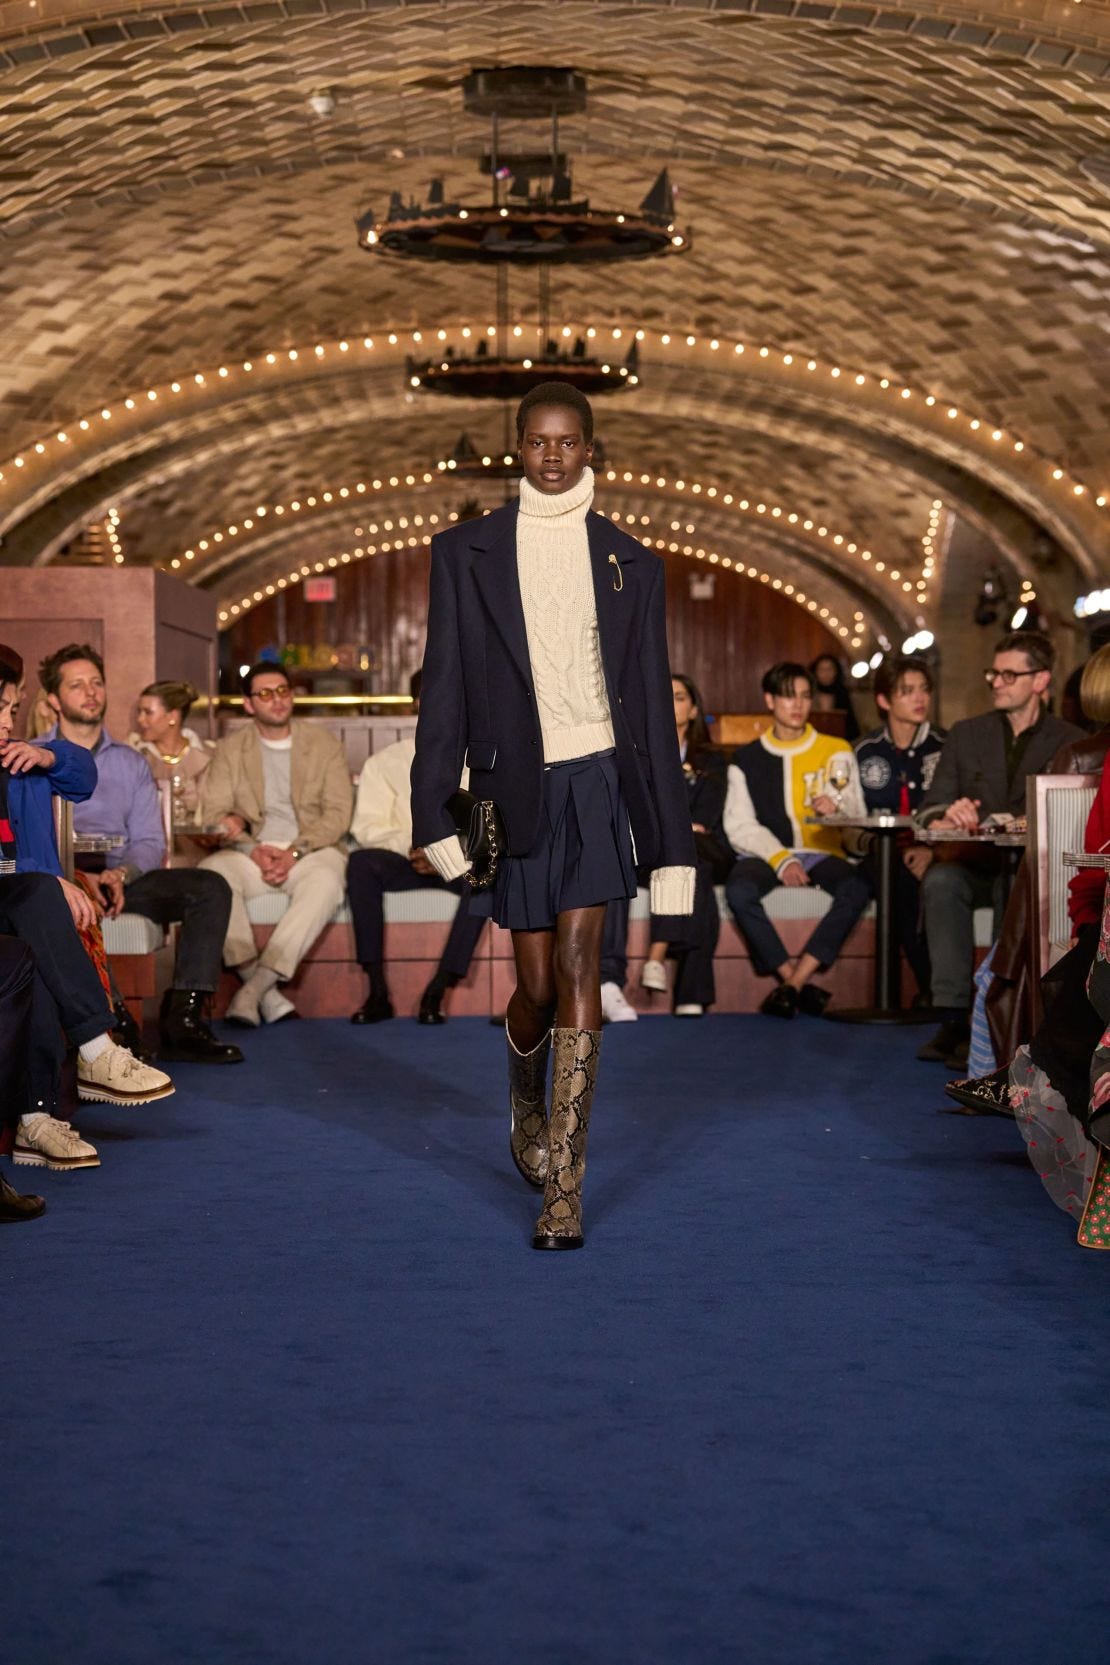 Tommy Hilfiger to return to NYFW with show exploring 'original preppy roots